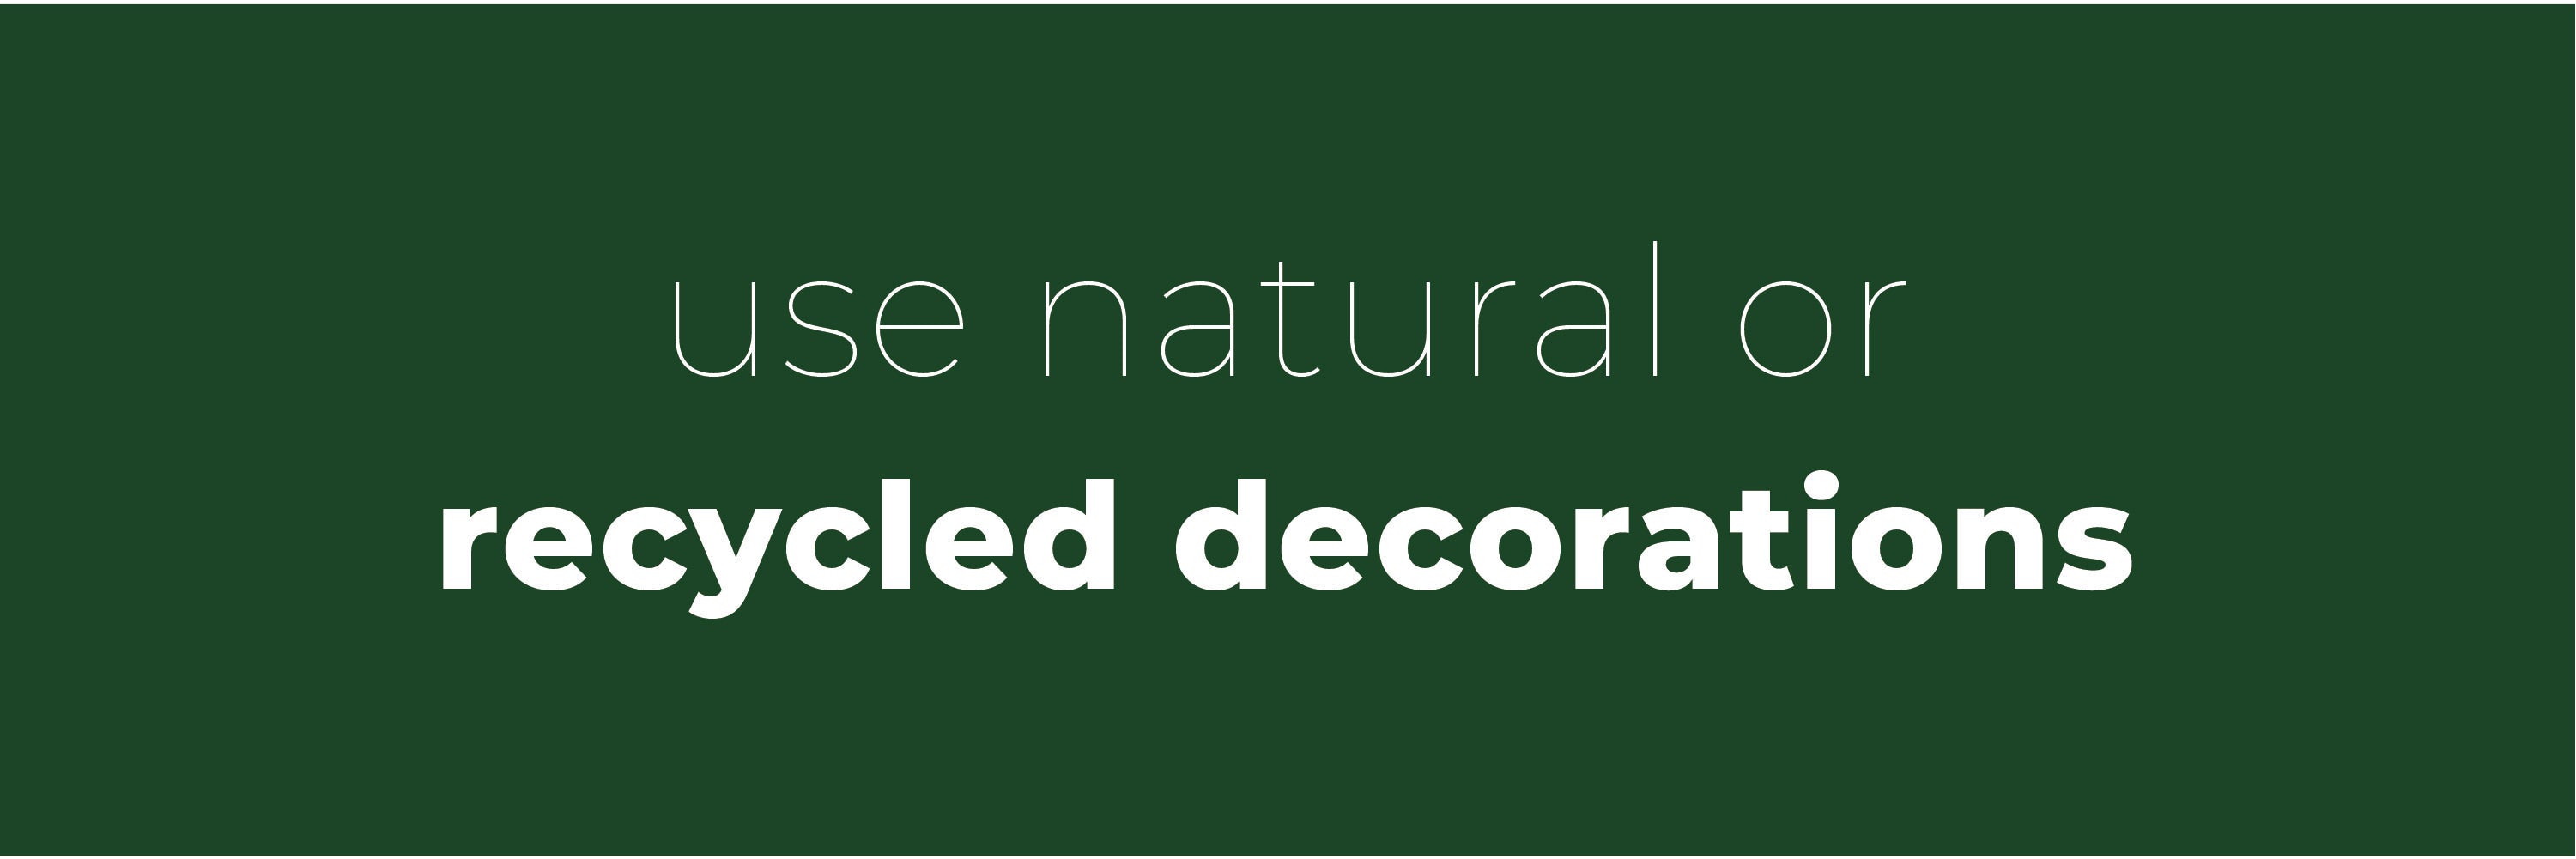 Use natural or recycled decorations